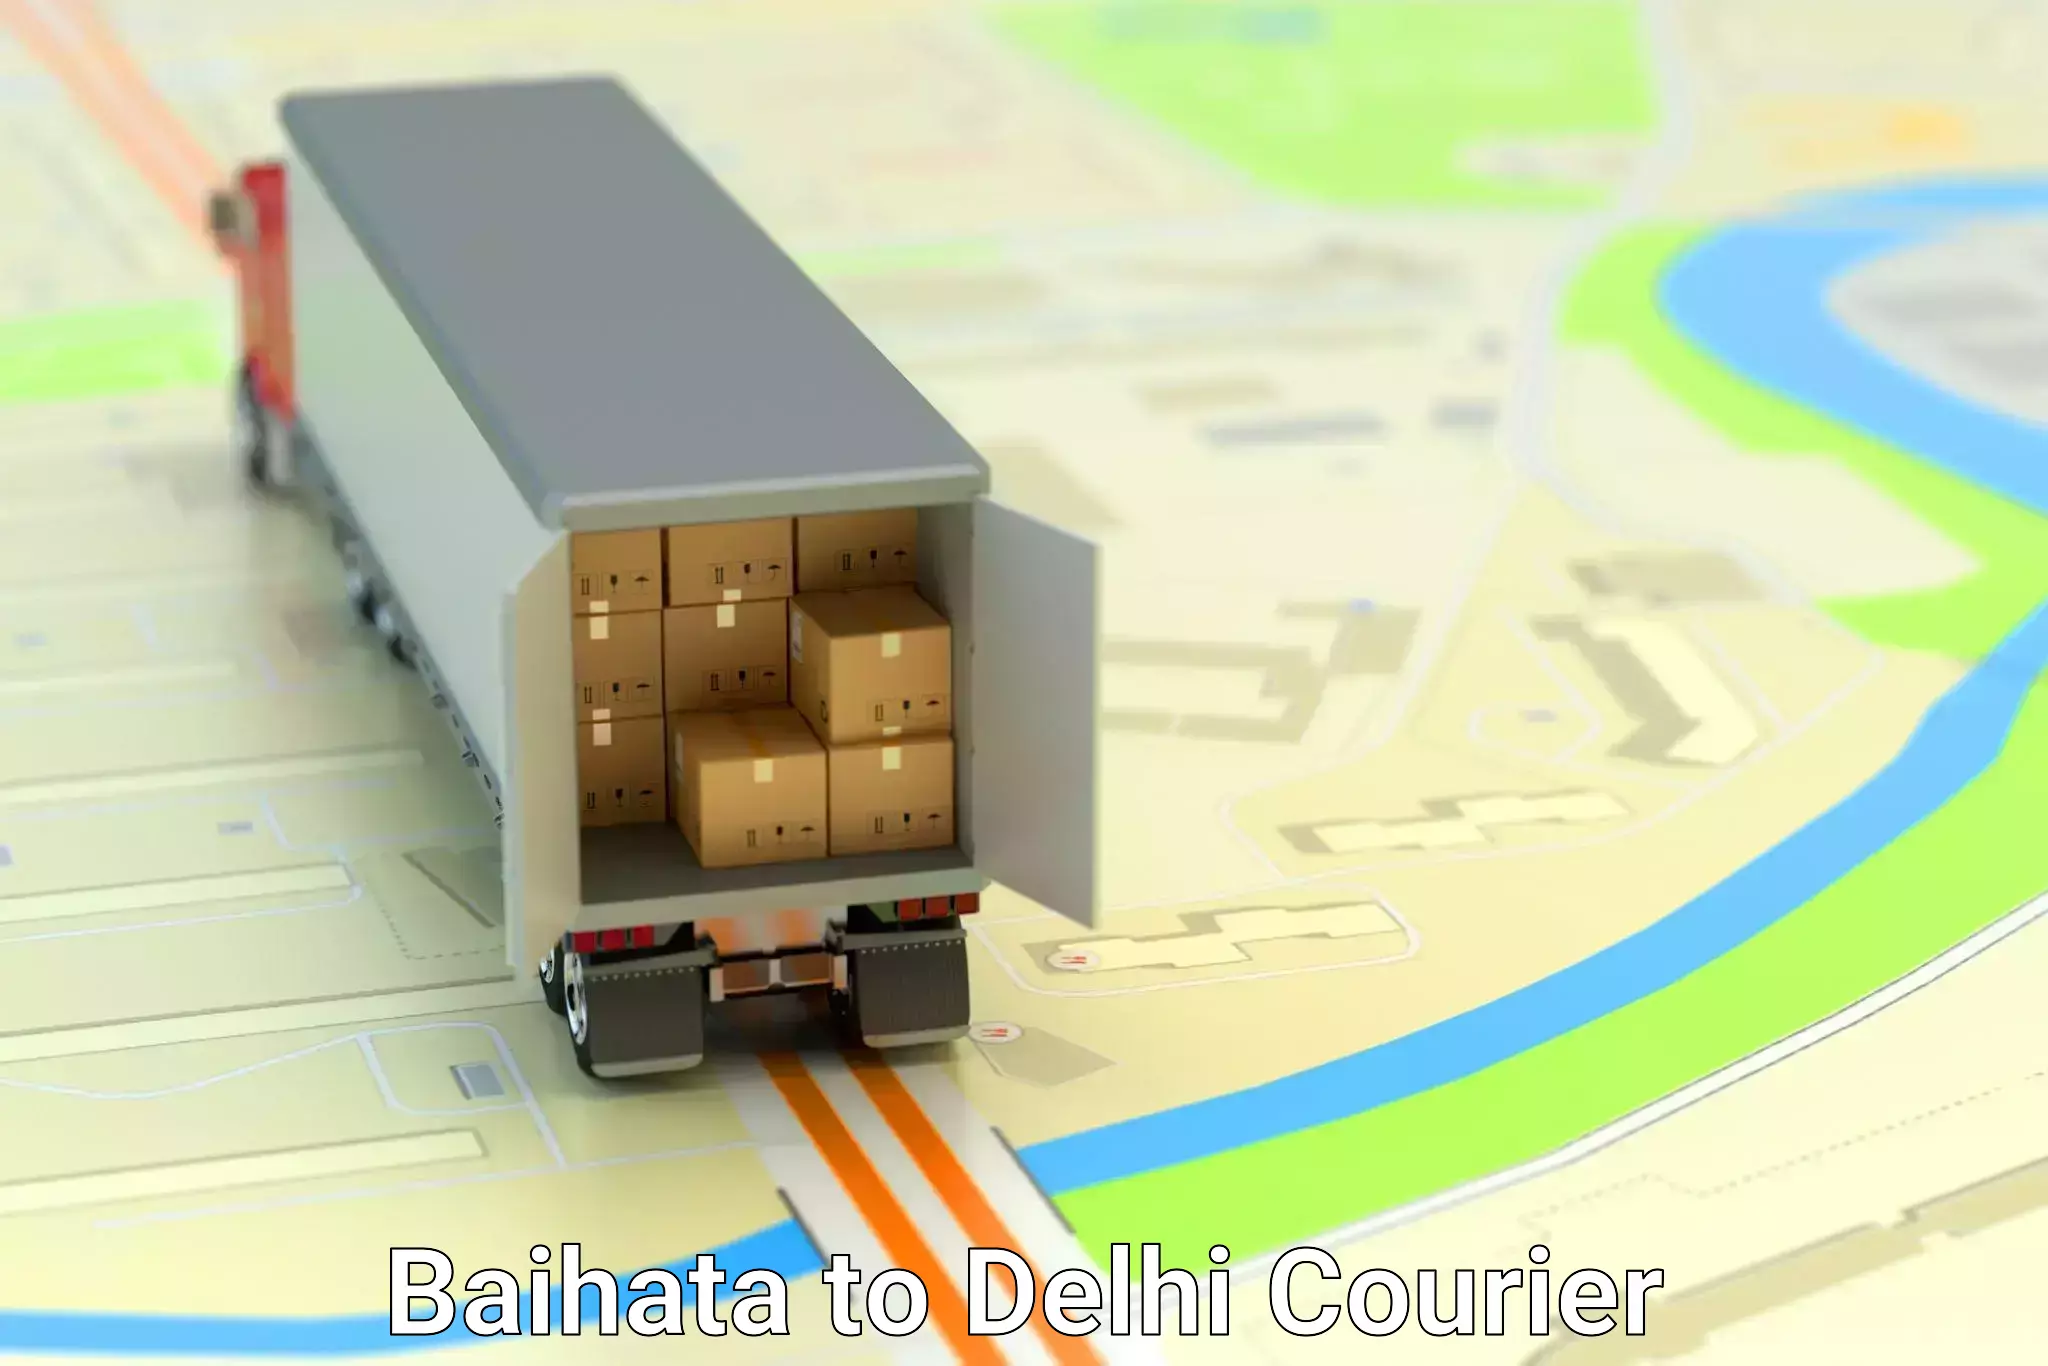 Package delivery network Baihata to University of Delhi